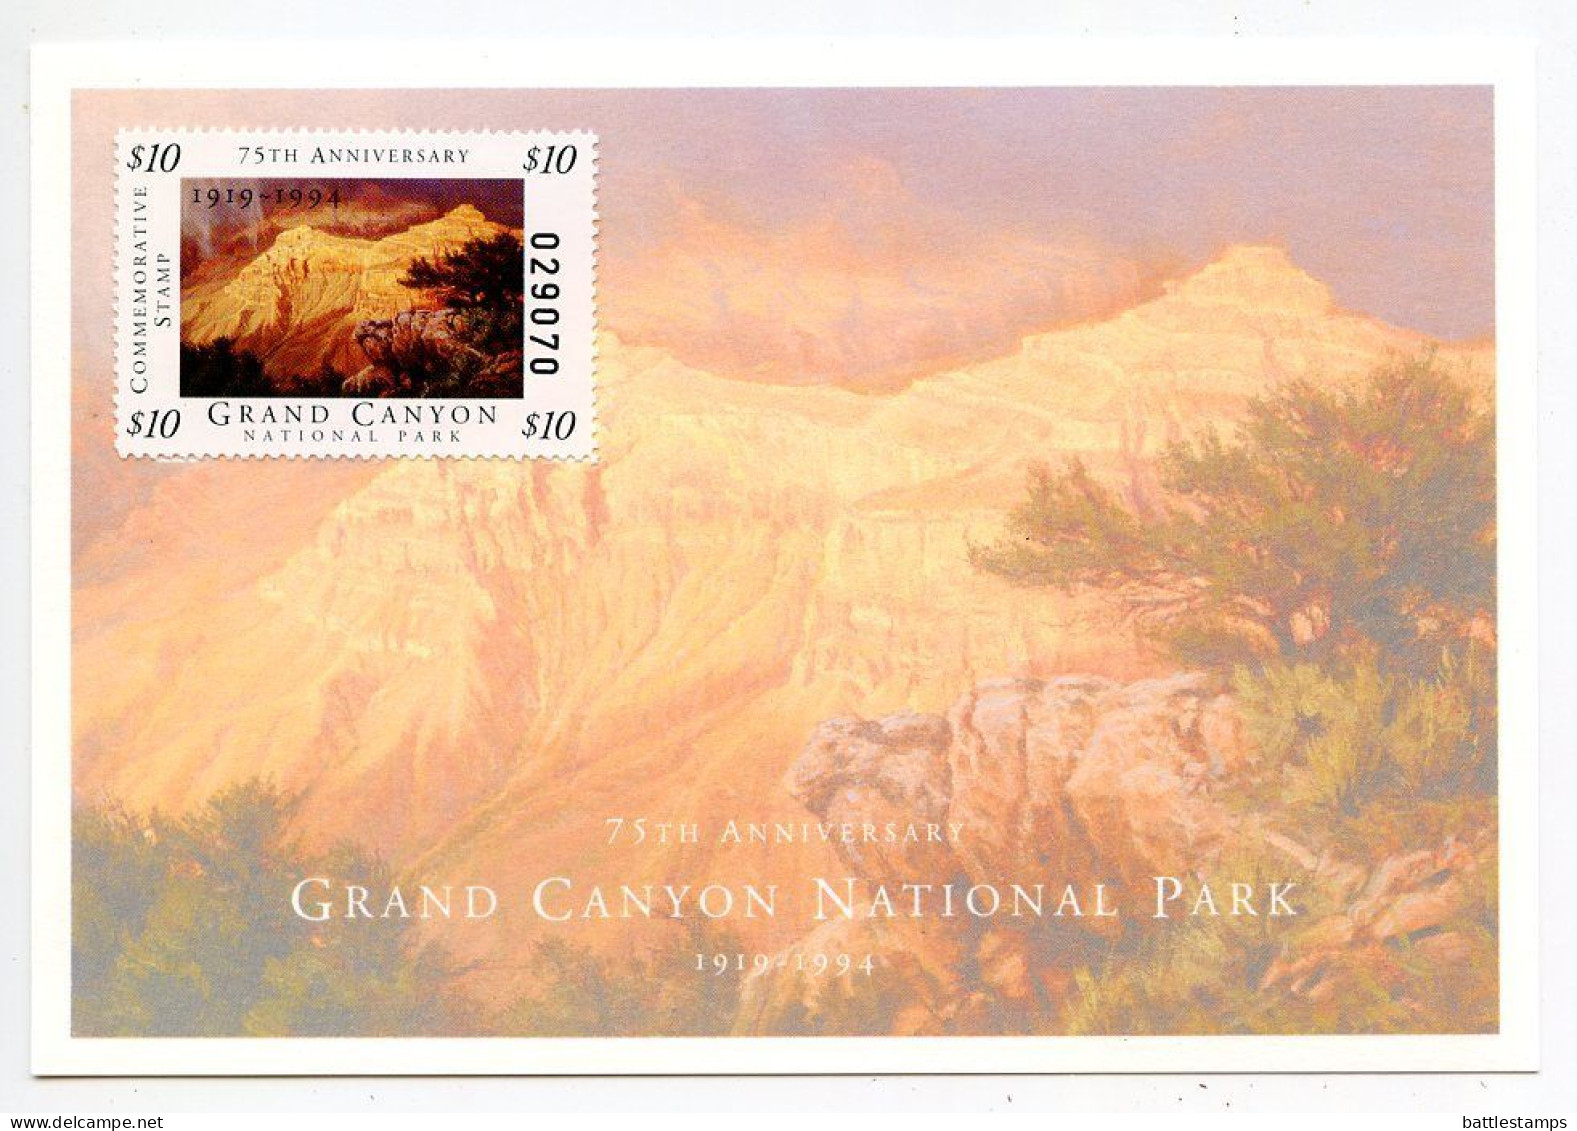 United States 1994 $10 Grand Canyon National Park 75th Anniversary Commemorative Stamp & Card - Unclassified